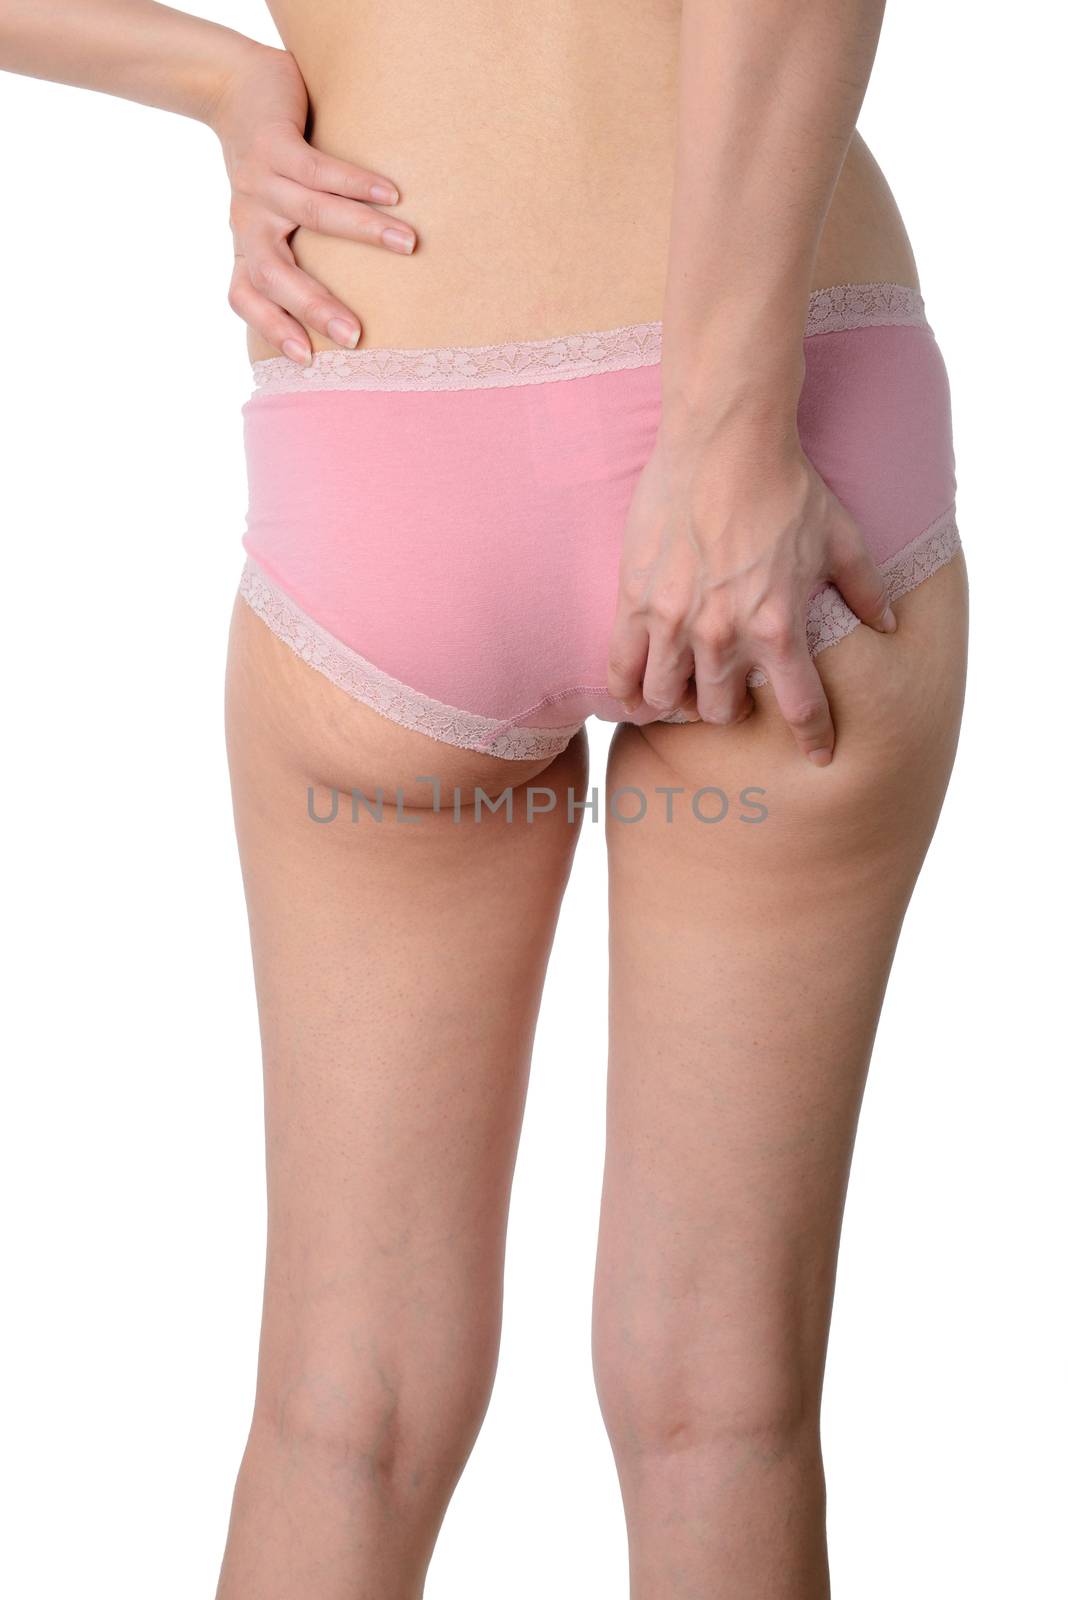 Slim woman checking her fat and cellulite on buttocks isolated o by numskyman